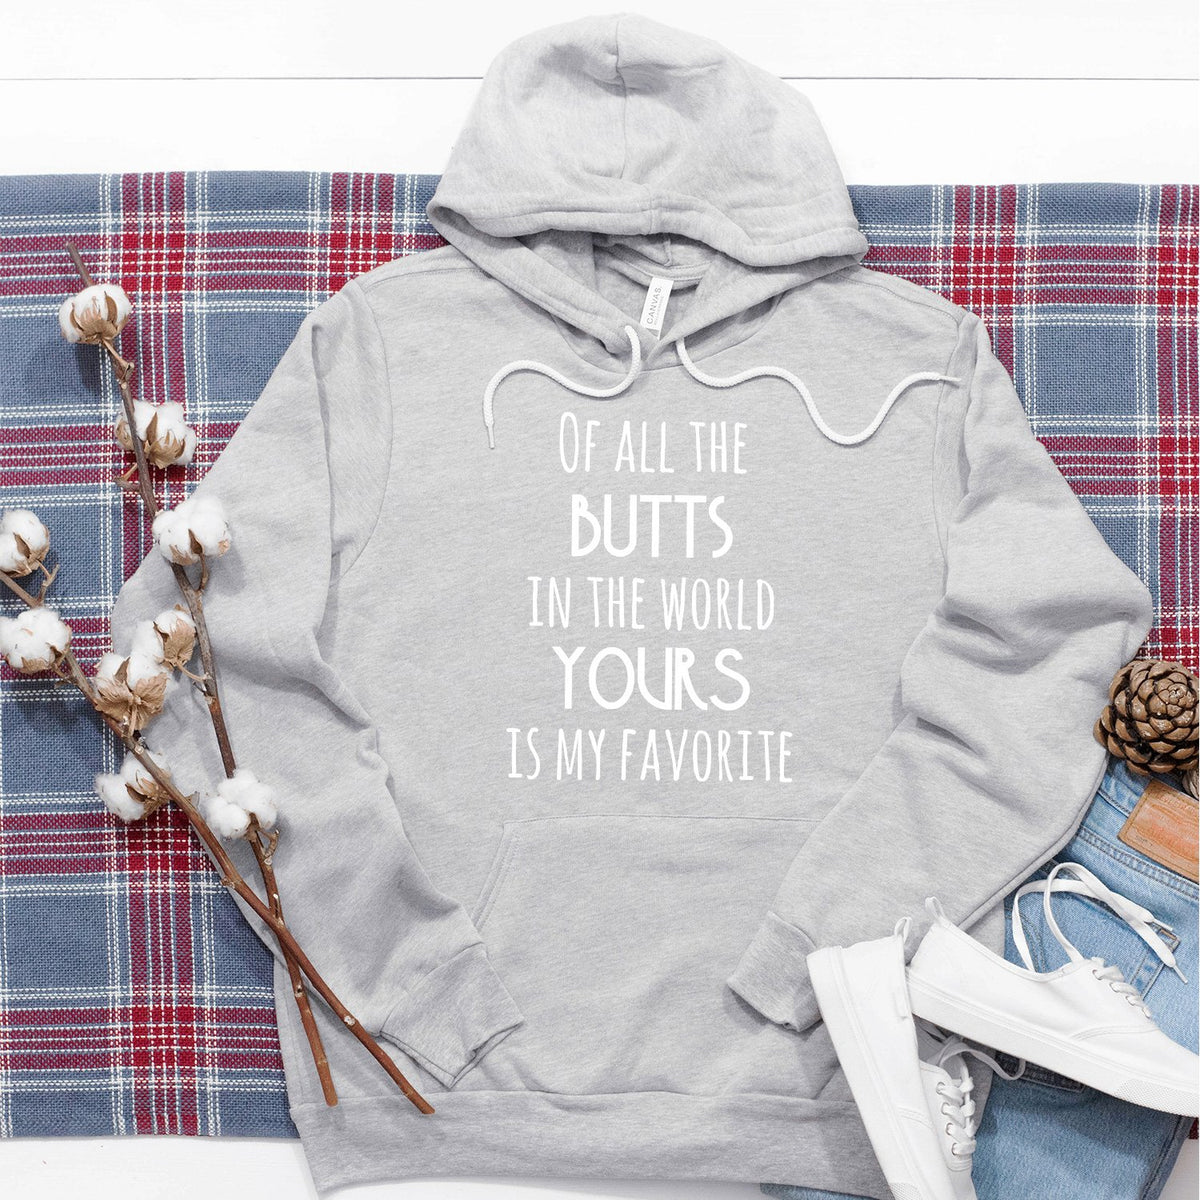 Off All the Butts in the World Yours is My Favorite - Hoodie Sweatshirt